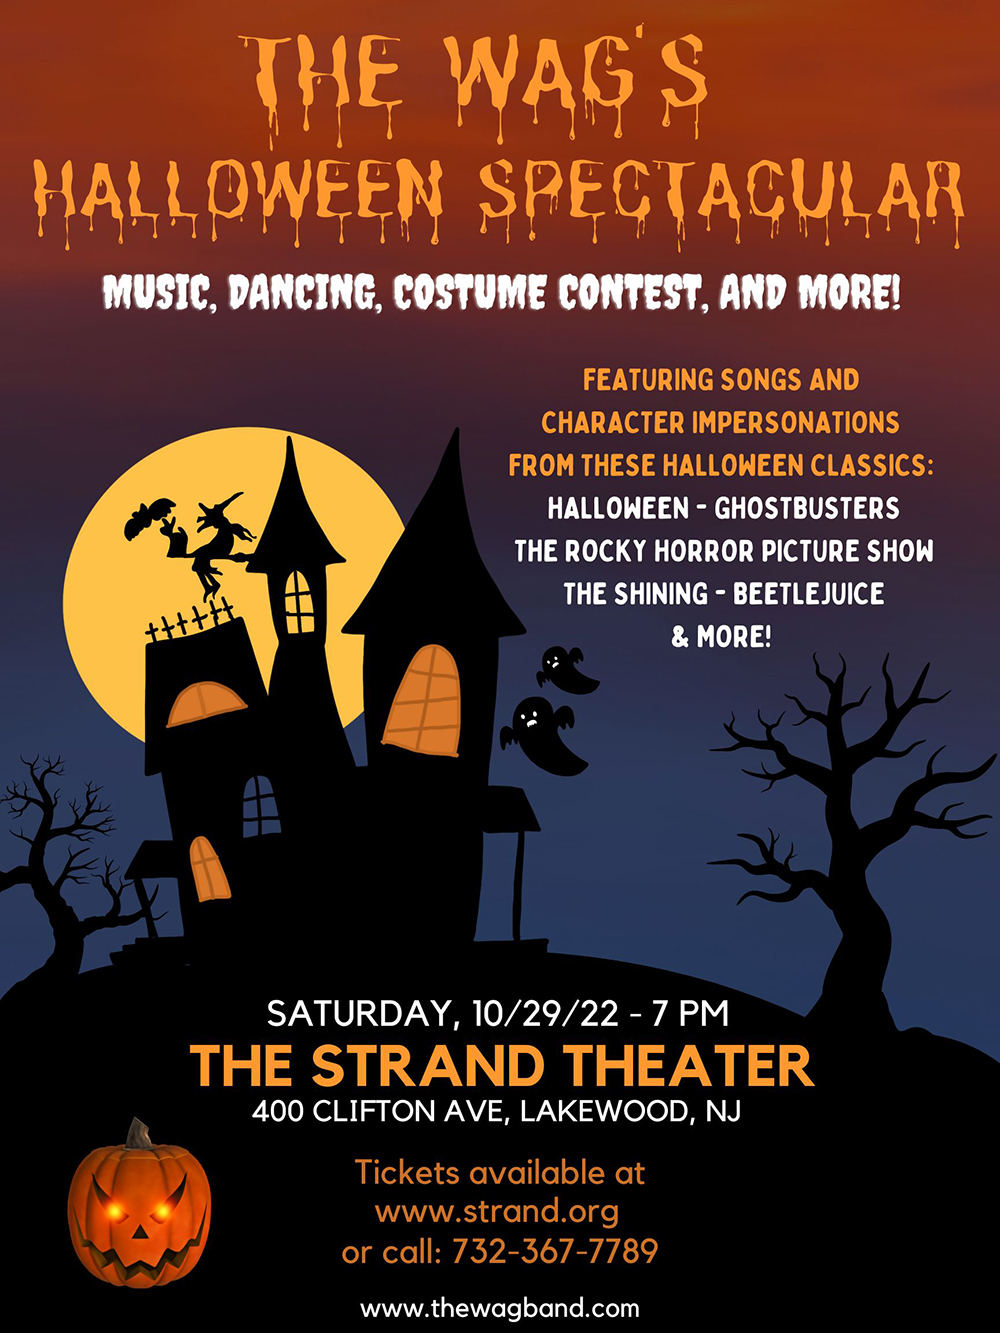 The Wag's Halloween Spectacular at The Strand Theater